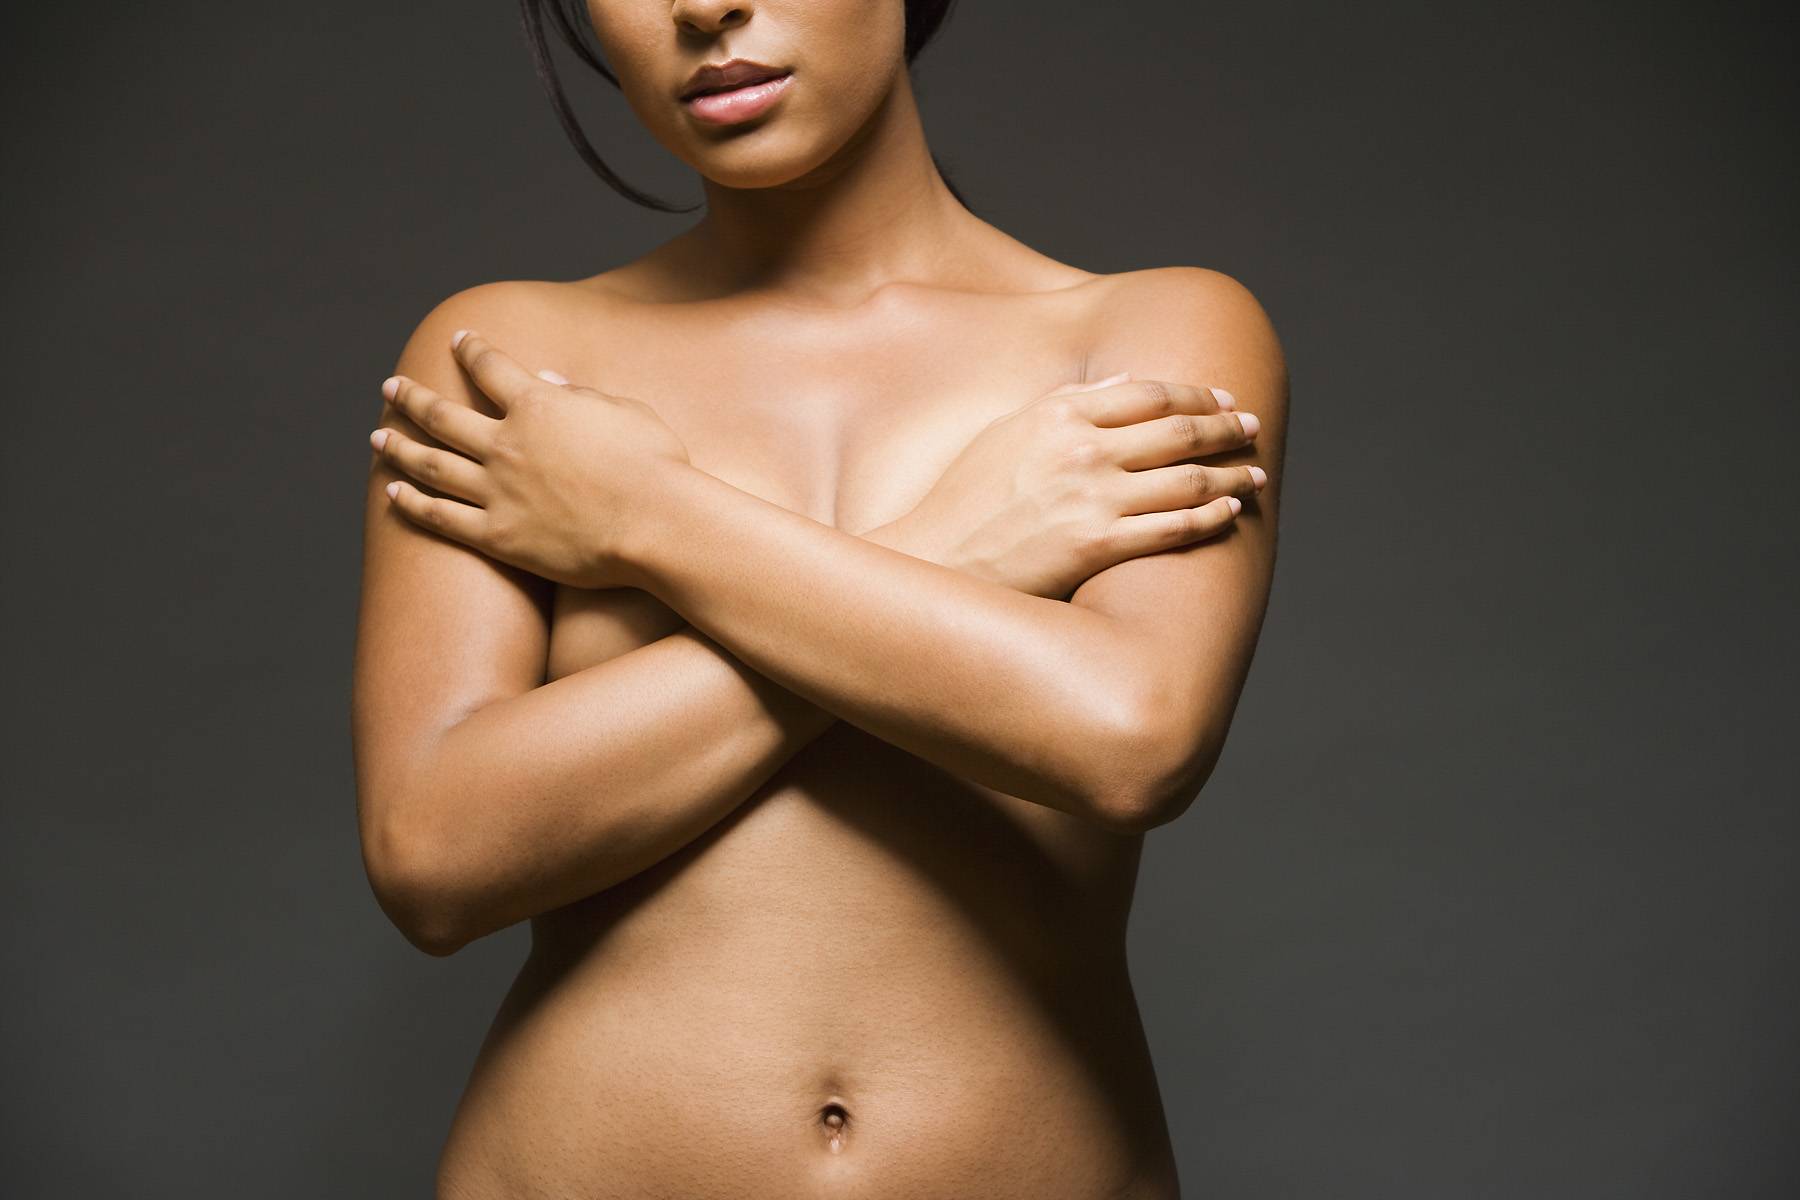 They Break Records - - Image 4 from 9 Surprising Facts About Your Breasts